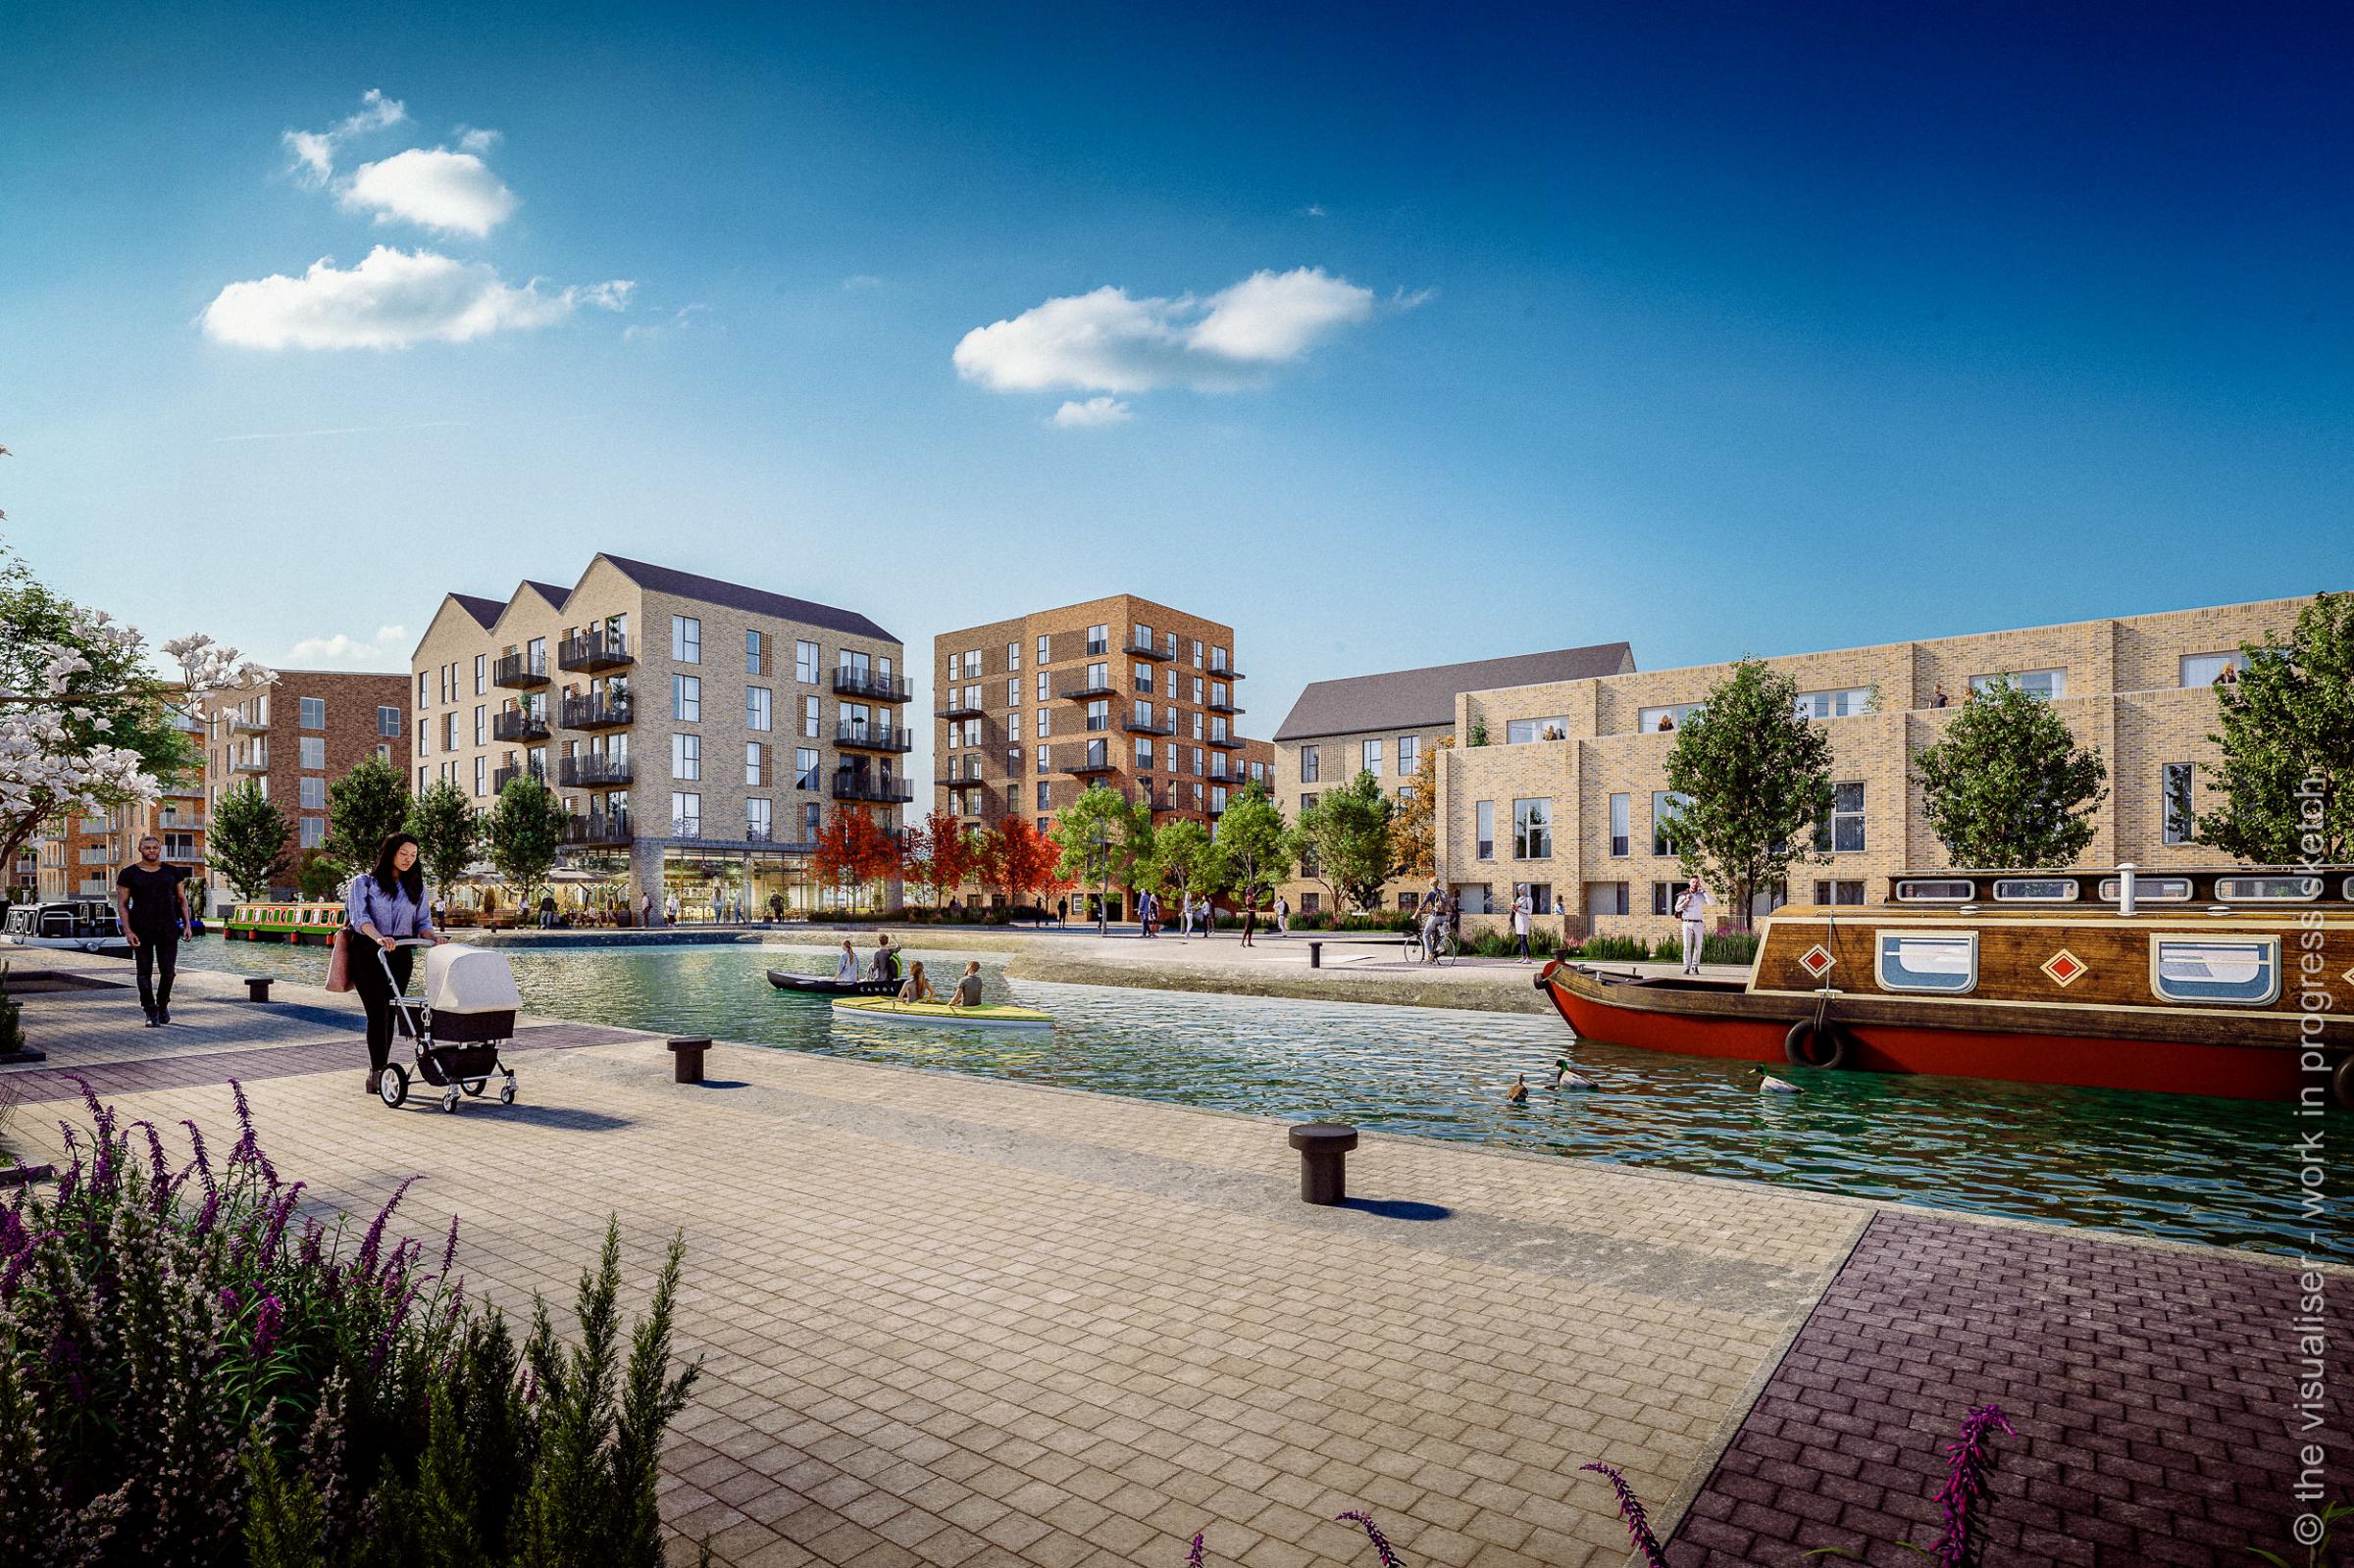 How Stoke Wharf could soon look if scheme gets approval